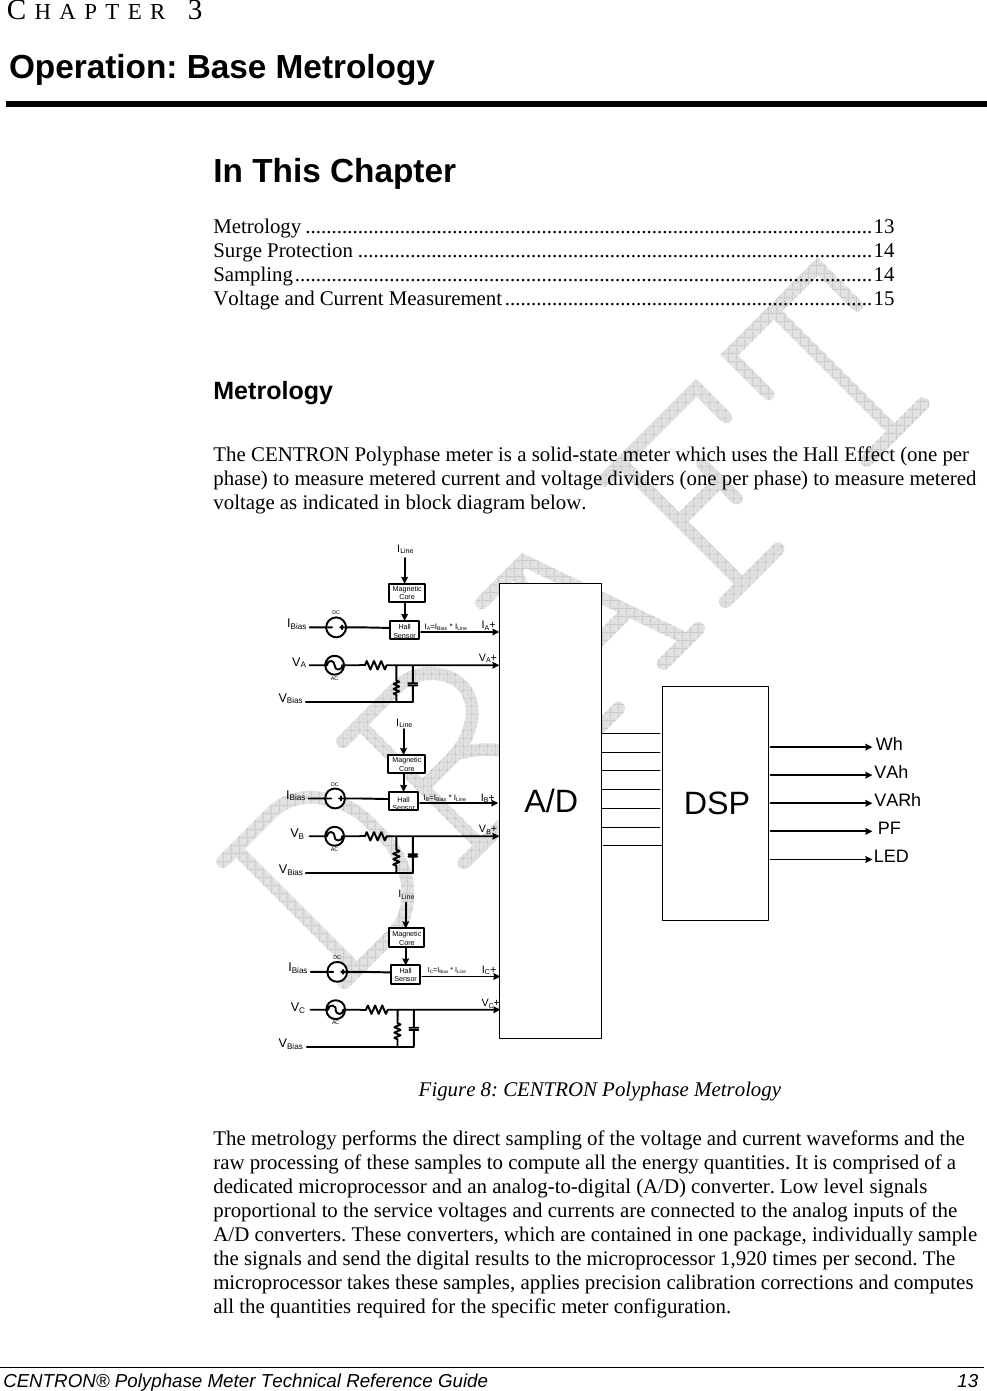  CENTRON® Polyphase Meter Technical Reference Guide  13 CHAPTER 3 Operation: Base Metrology In This Chapter Metrology ............................................................................................................13Surge Protection ..................................................................................................14Sampling..............................................................................................................14Voltage and Current Measurement......................................................................15  Metrology The CENTRON Polyphase meter is a solid-state meter which uses the Hall Effect (one per phase) to measure metered current and voltage dividers (one per phase) to measure metered voltage as indicated in block diagram below.  DCDCACIC=IBias * ILine IC+VC+ILineIBiasVCVBiasMagnetic CoreHall   SensorDCACIB=IBias * ILine IB+VB+ILineIBiasVBVBiasMagnetic CoreHall   SensorACIA=IBias * ILine IA+VA+ILineIBiasVAMagnetic CoreHall   SensorA/D DSPWhVAhVARhPFLEDVBias Figure 8: CENTRON Polyphase Metrology The metrology performs the direct sampling of the voltage and current waveforms and the raw processing of these samples to compute all the energy quantities. It is comprised of a dedicated microprocessor and an analog-to-digital (A/D) converter. Low level signals proportional to the service voltages and currents are connected to the analog inputs of the A/D converters. These converters, which are contained in one package, individually sample the signals and send the digital results to the microprocessor 1,920 times per second. The microprocessor takes these samples, applies precision calibration corrections and computes all the quantities required for the specific meter configuration.  